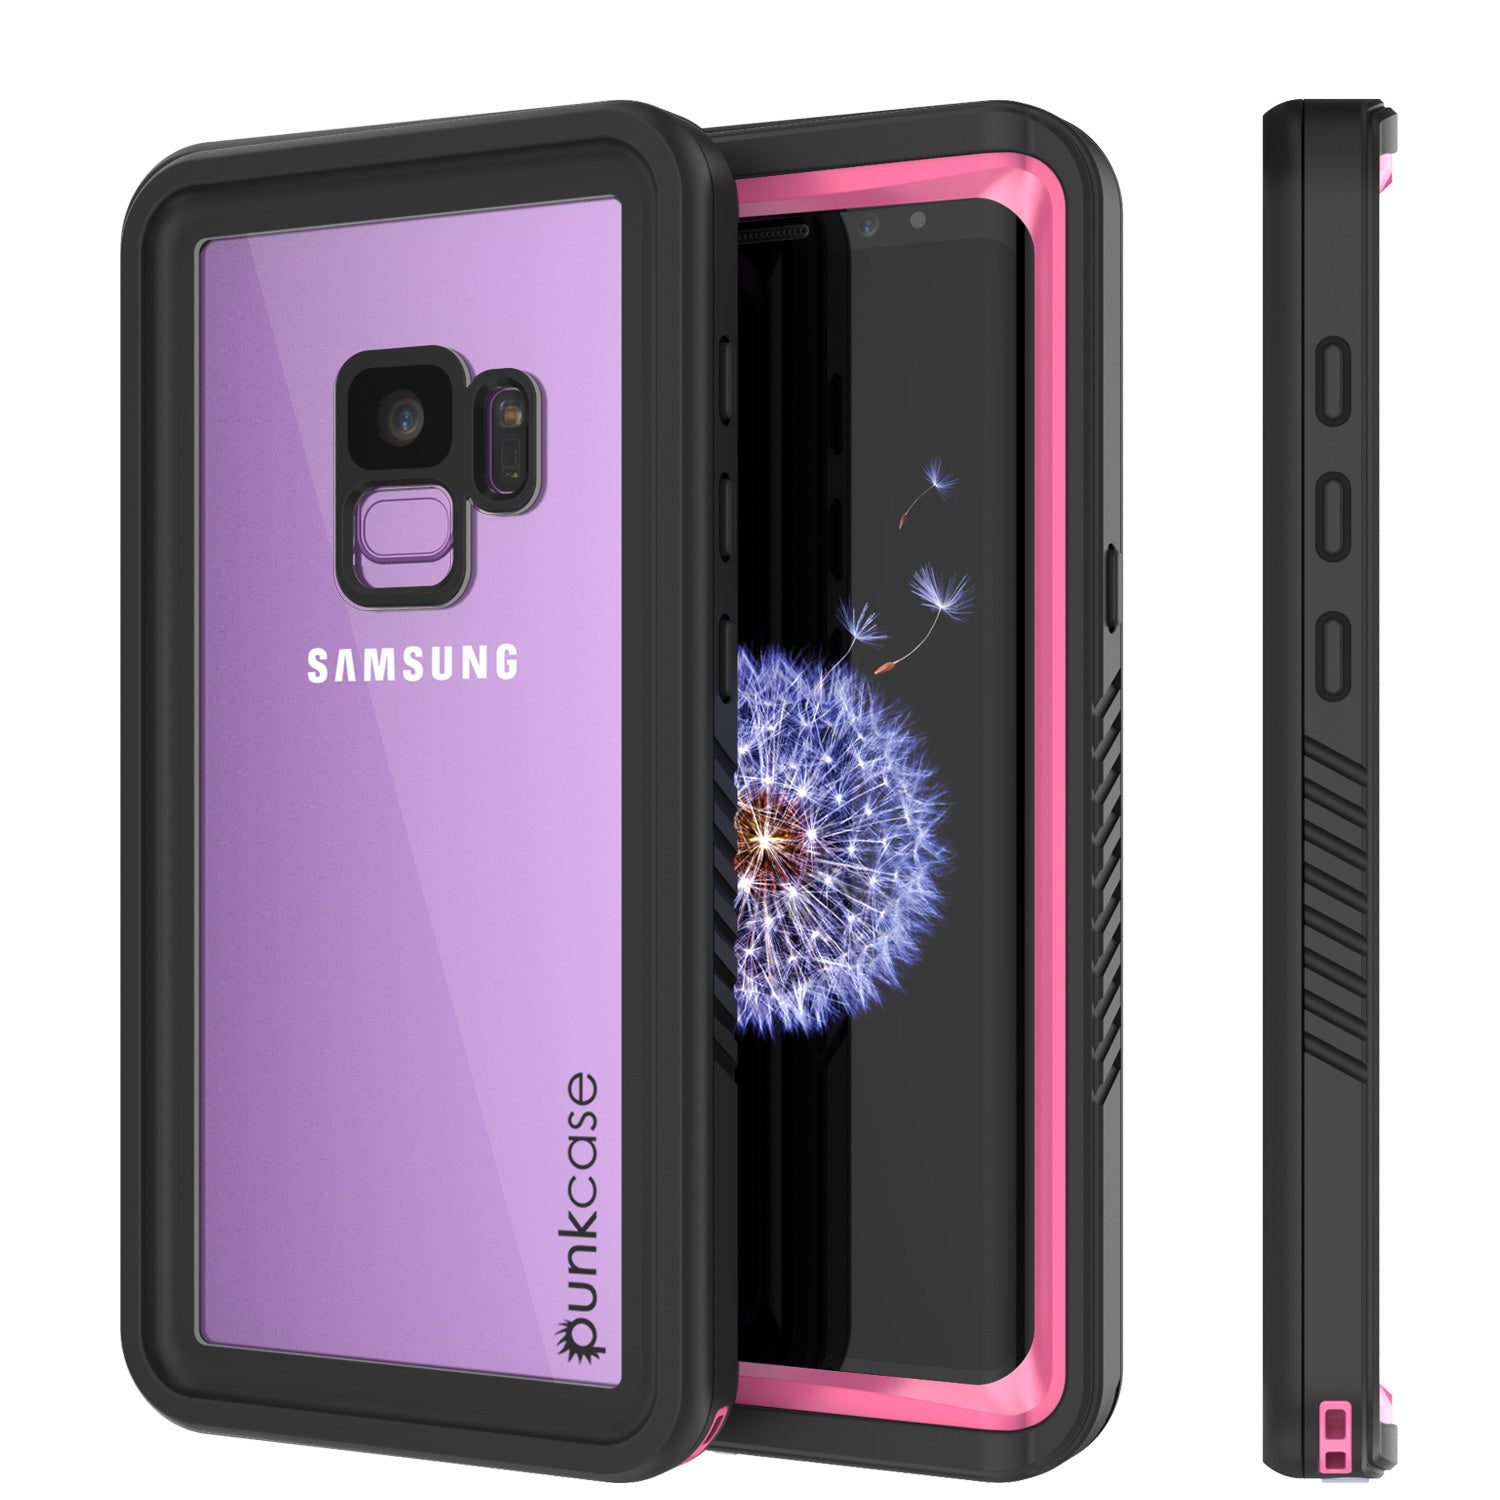 Galaxy S9 PLUS Waterproof Case, Punkcase [Extreme Series] [Slim Fit] [IP68 Certified] [Shockproof] [Snowproof] [Dirproof] Armor Cover W/ Built In Screen Protector for Samsung Galaxy S9+ [Pink]